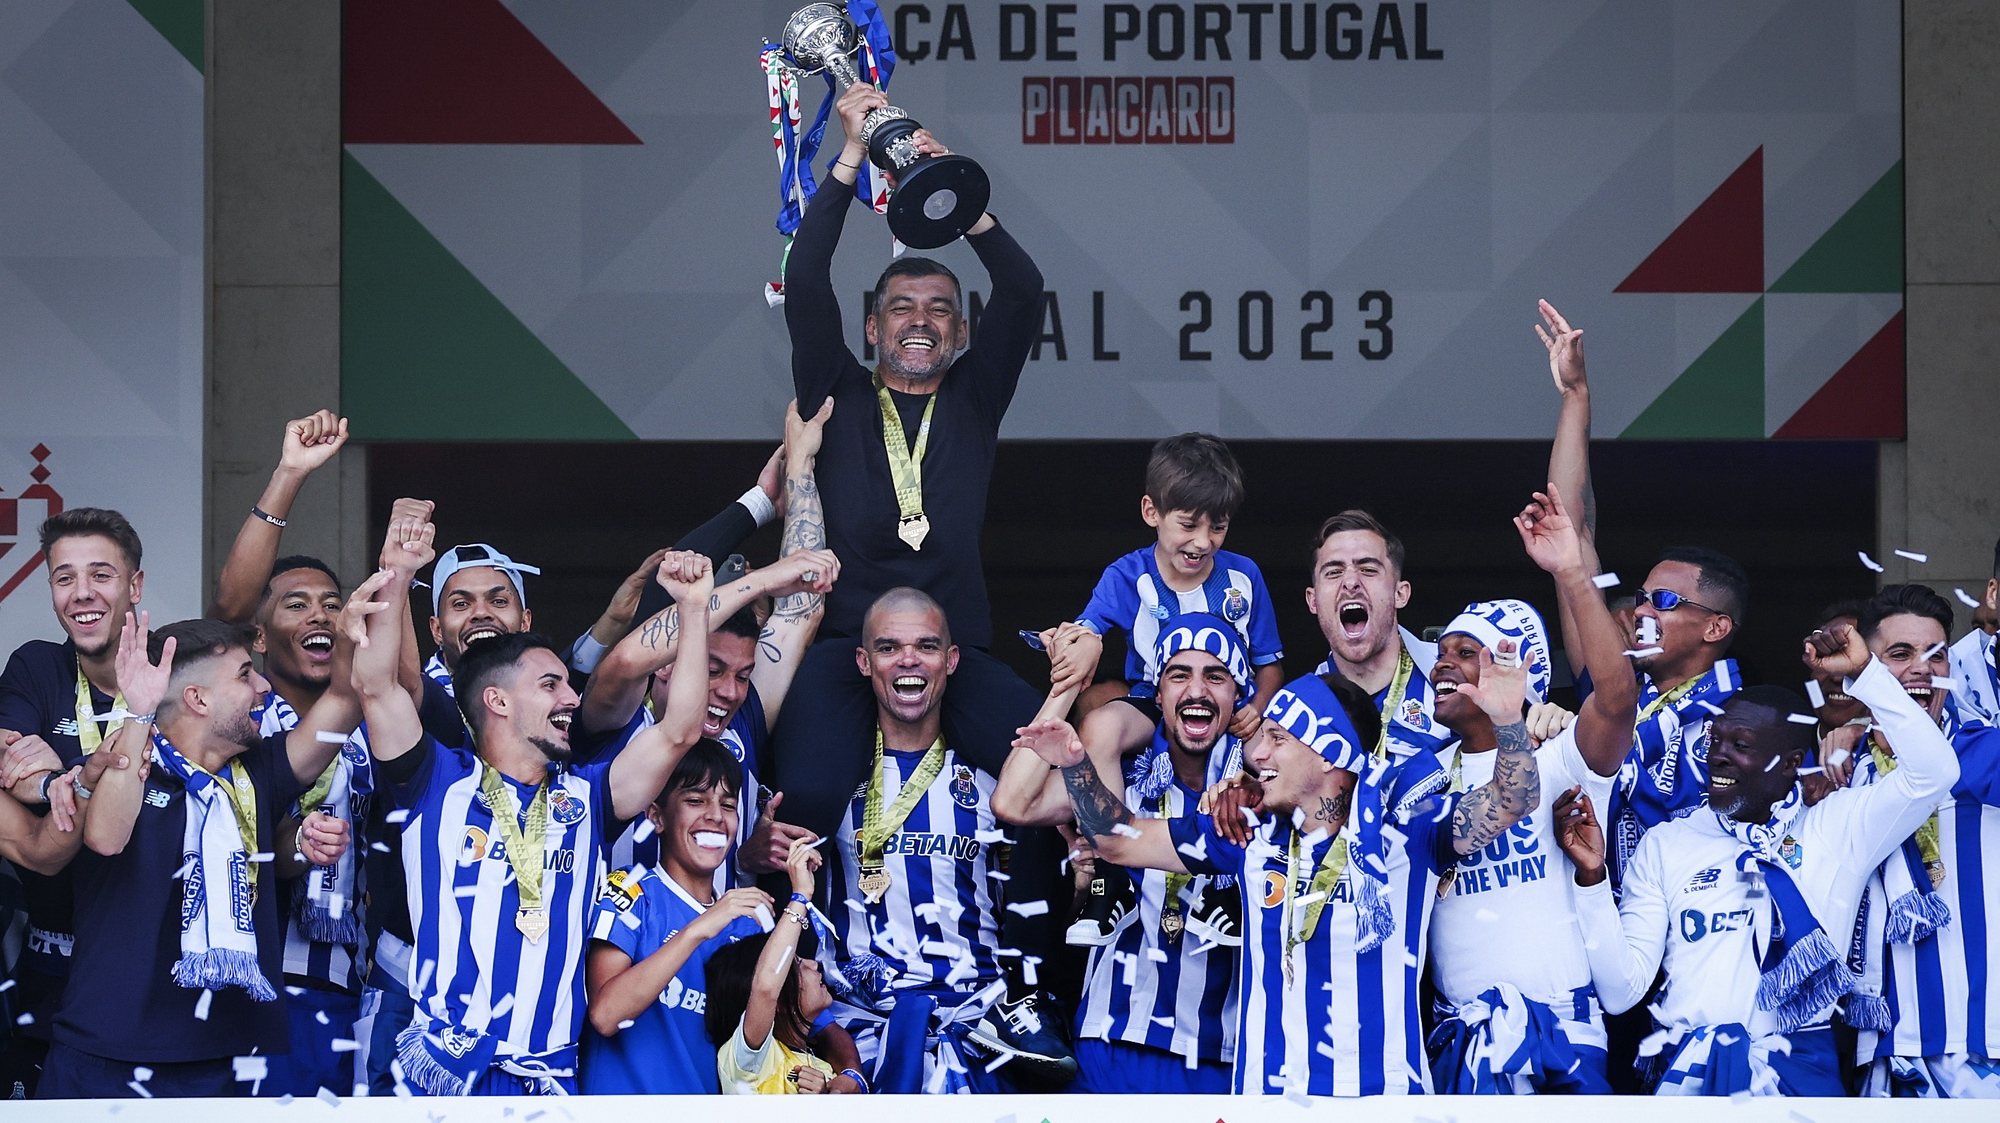 FC Porto&#039;s head coach Sergio Conceicao and his players lifts the trophy after winning the Portugal Cup final soccer match against SC Braga held at Jamor National stadium in Oeiras, outskirts of Lisbon, Portugal, 04 June 2023. JOSE SENA GOULAO/LUSA